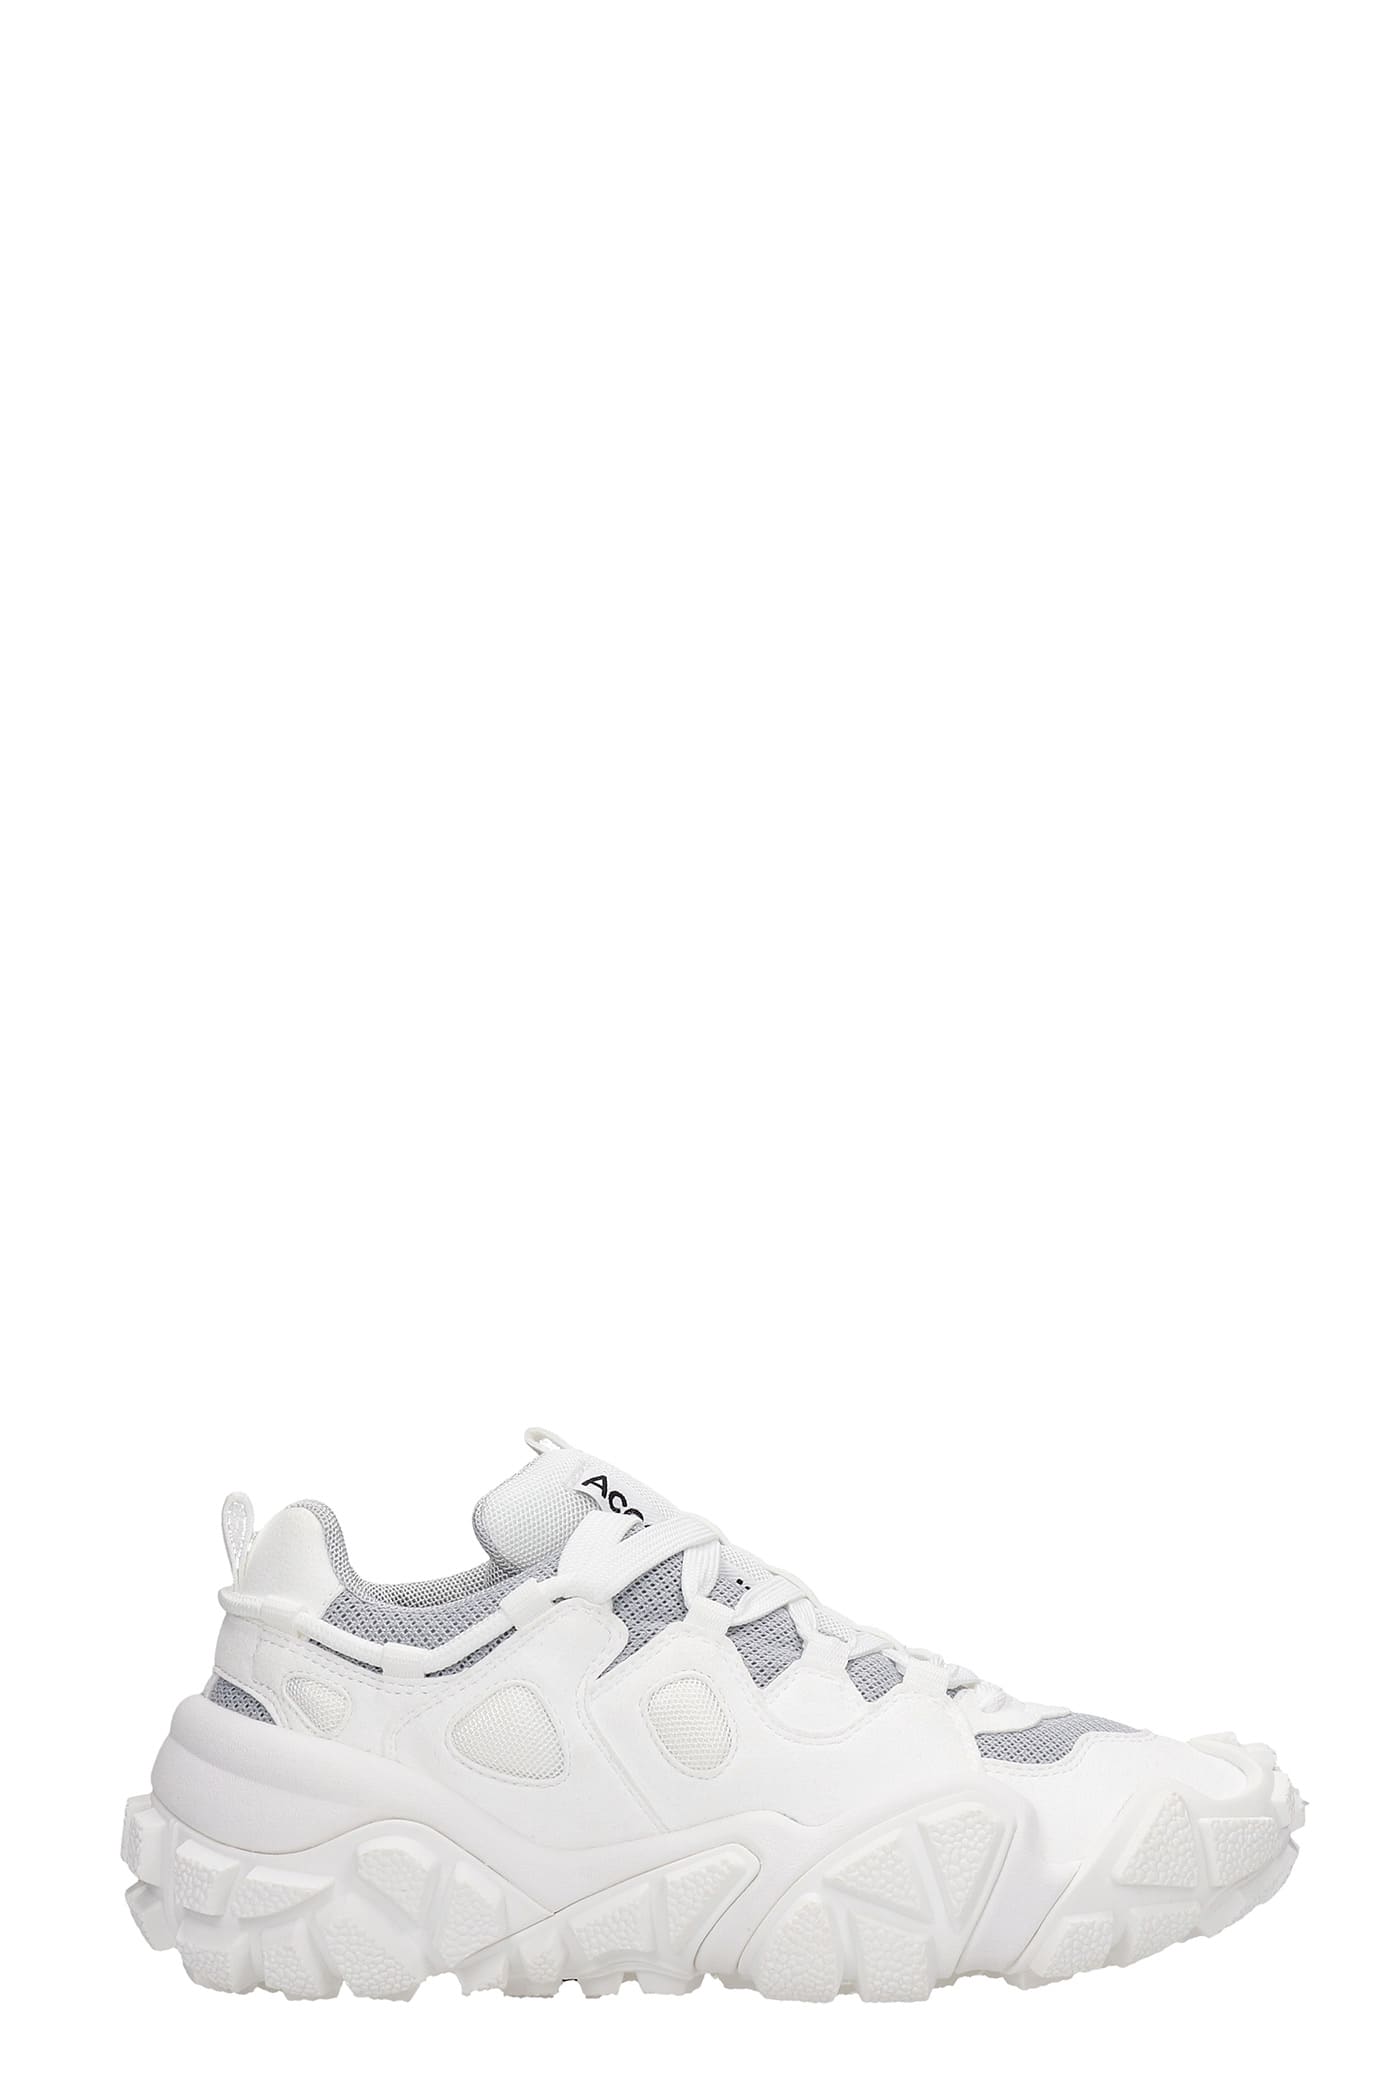 Acne Studios Bolzter Sneakers In White Synthetic Fibers